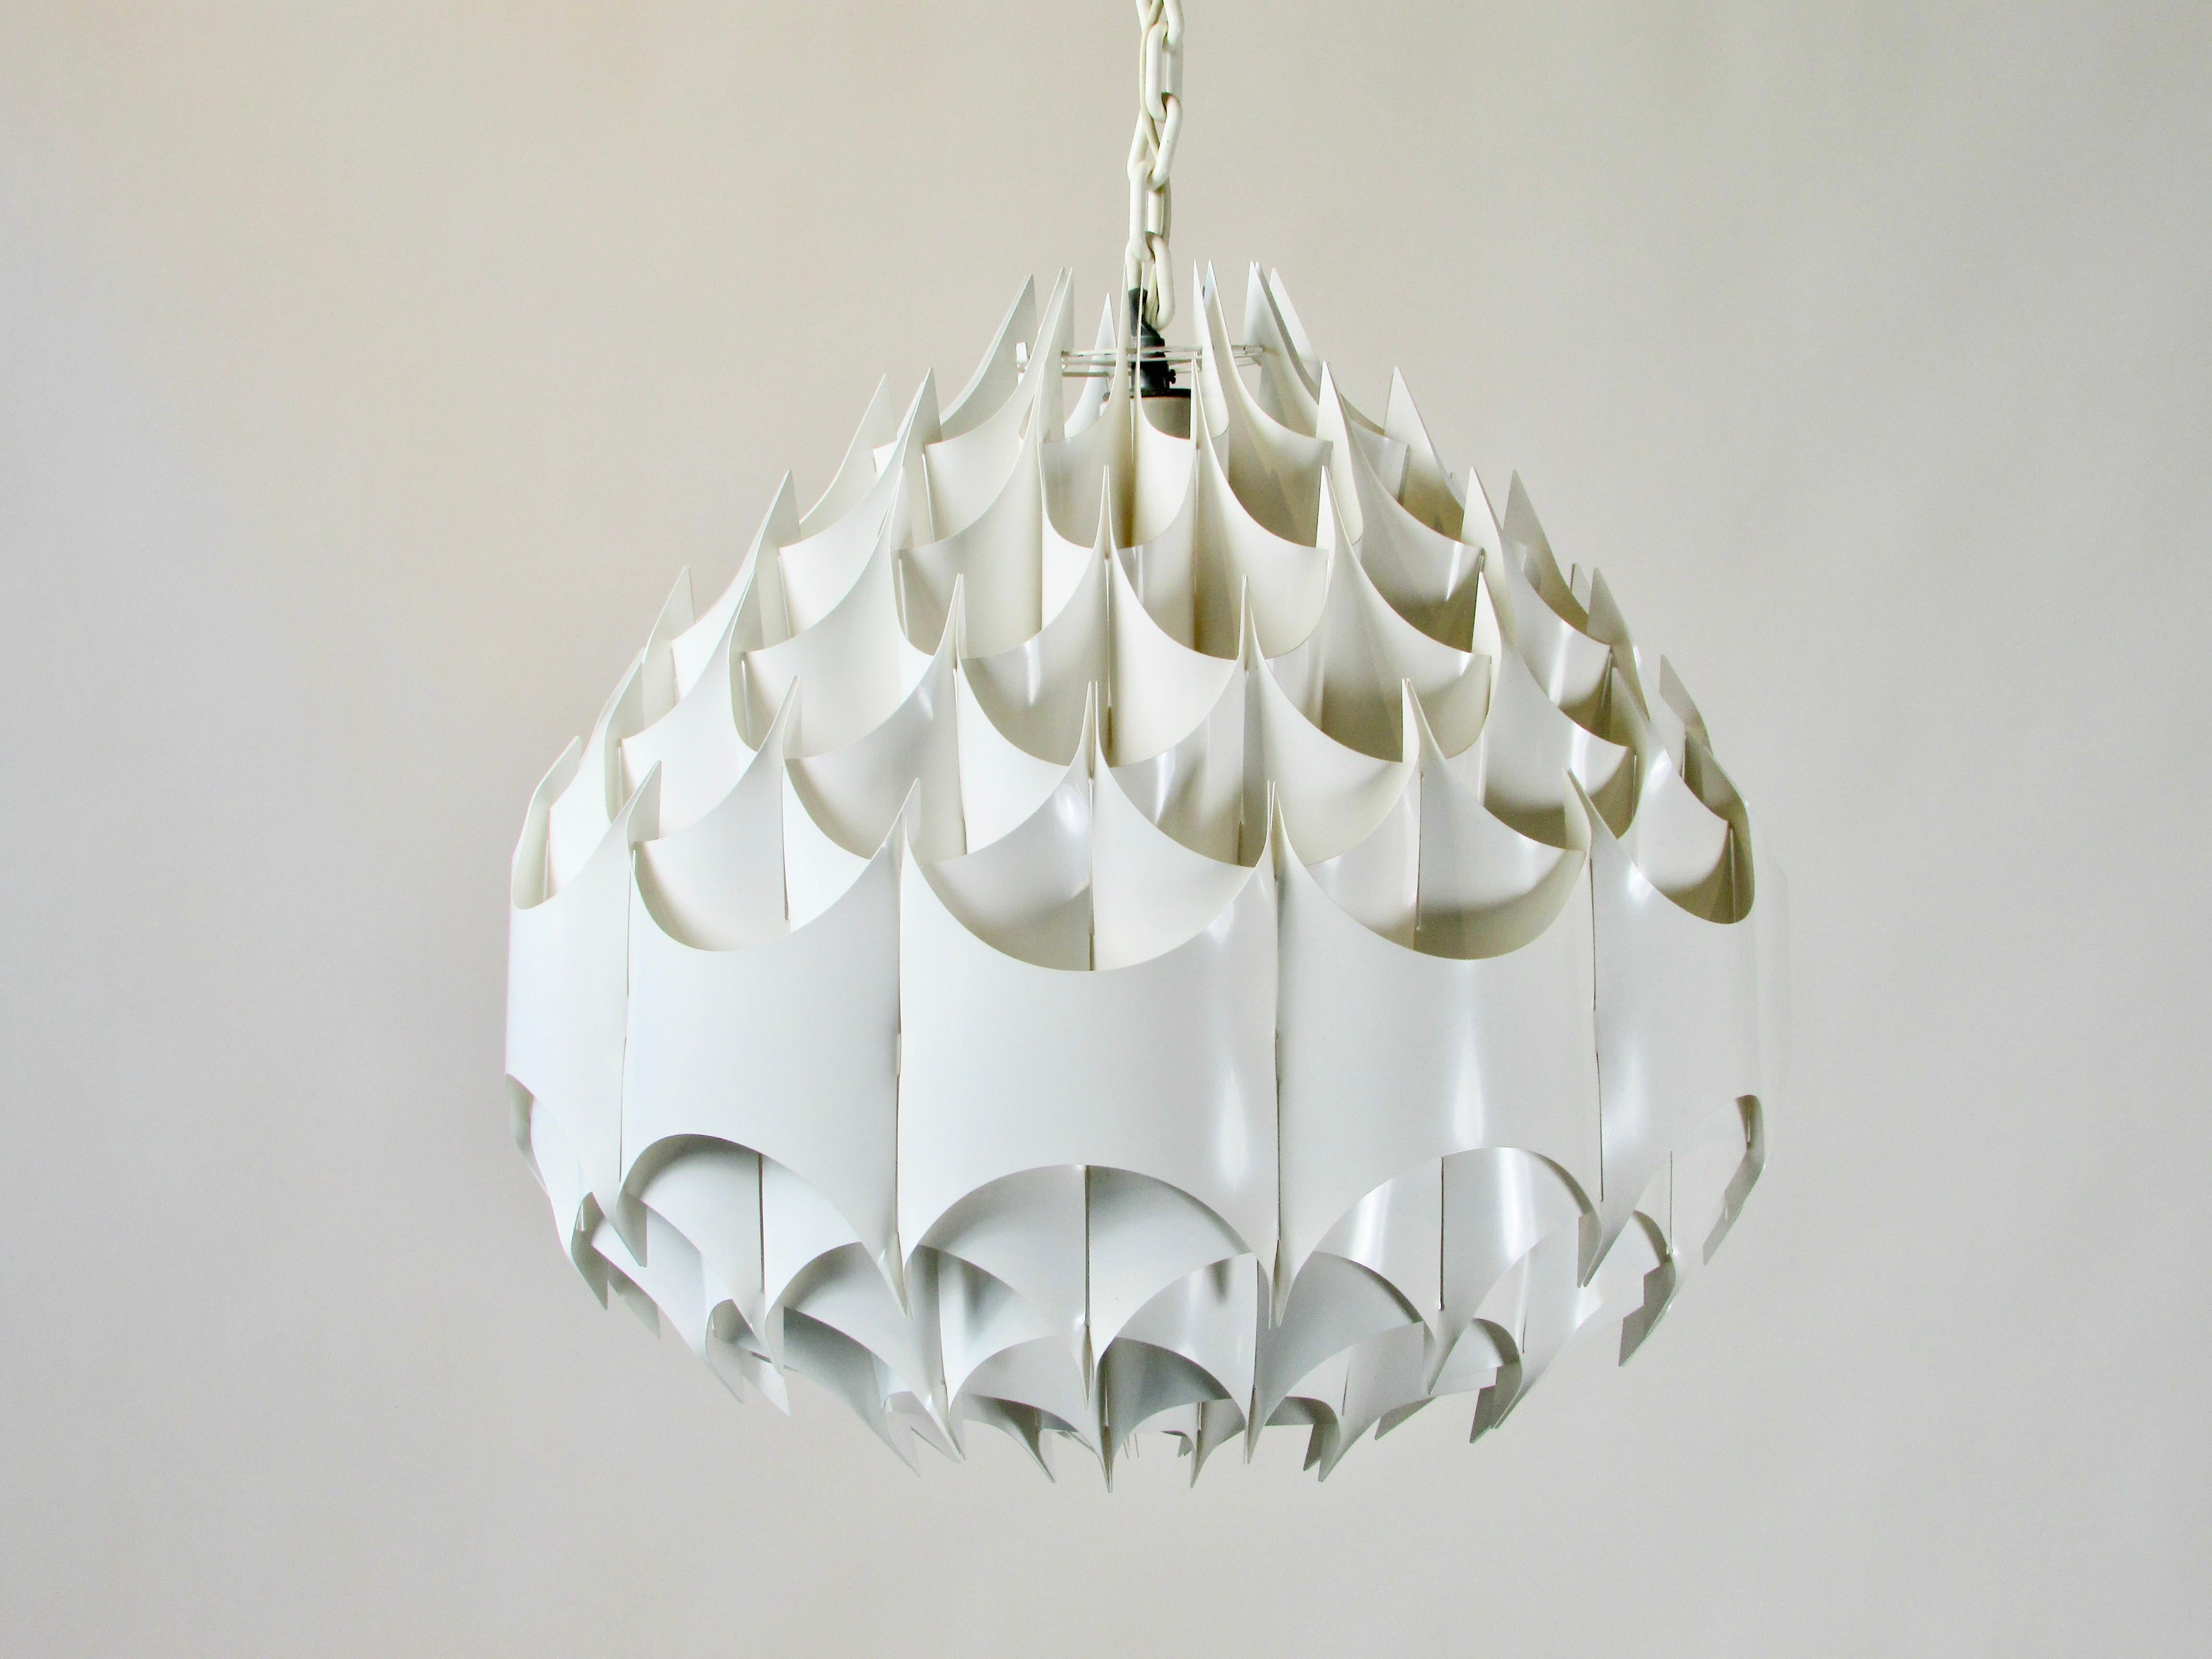 Designed be Havlova Miranda for Vest Leuchten Austria . Heat resistant white plastic elements interwoven to a delicate sculptural sphere form this space age hanging pendant lamp or chandelier .  
The principle of this design lies in the addition of